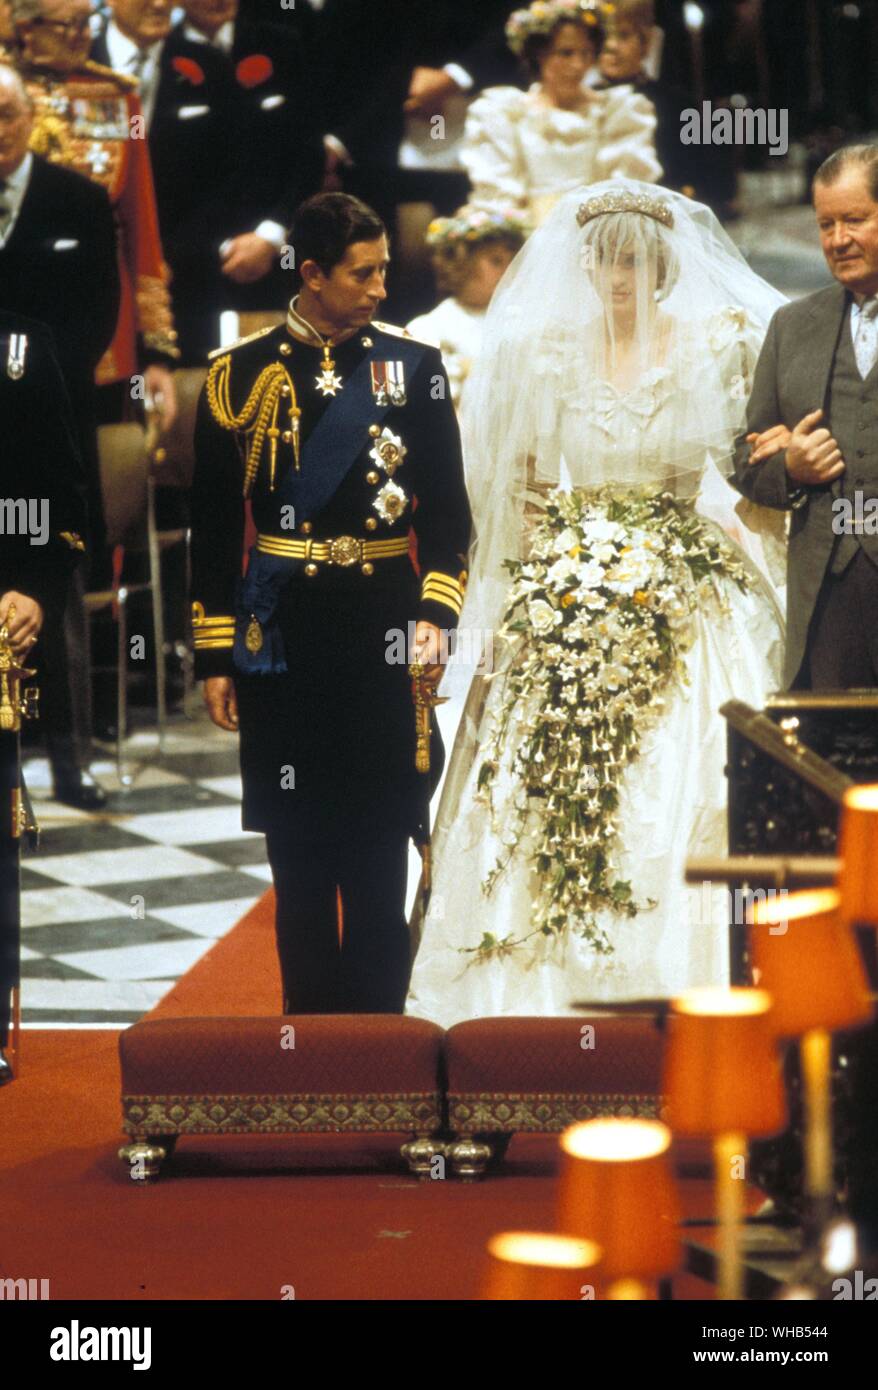 Wedding of the Prince and Princess of Wales (Lady Diana Spencer) 29 July 1981 with Earl Spencer at the beginning of the ceremony in St. Pauls.. Stock Photo